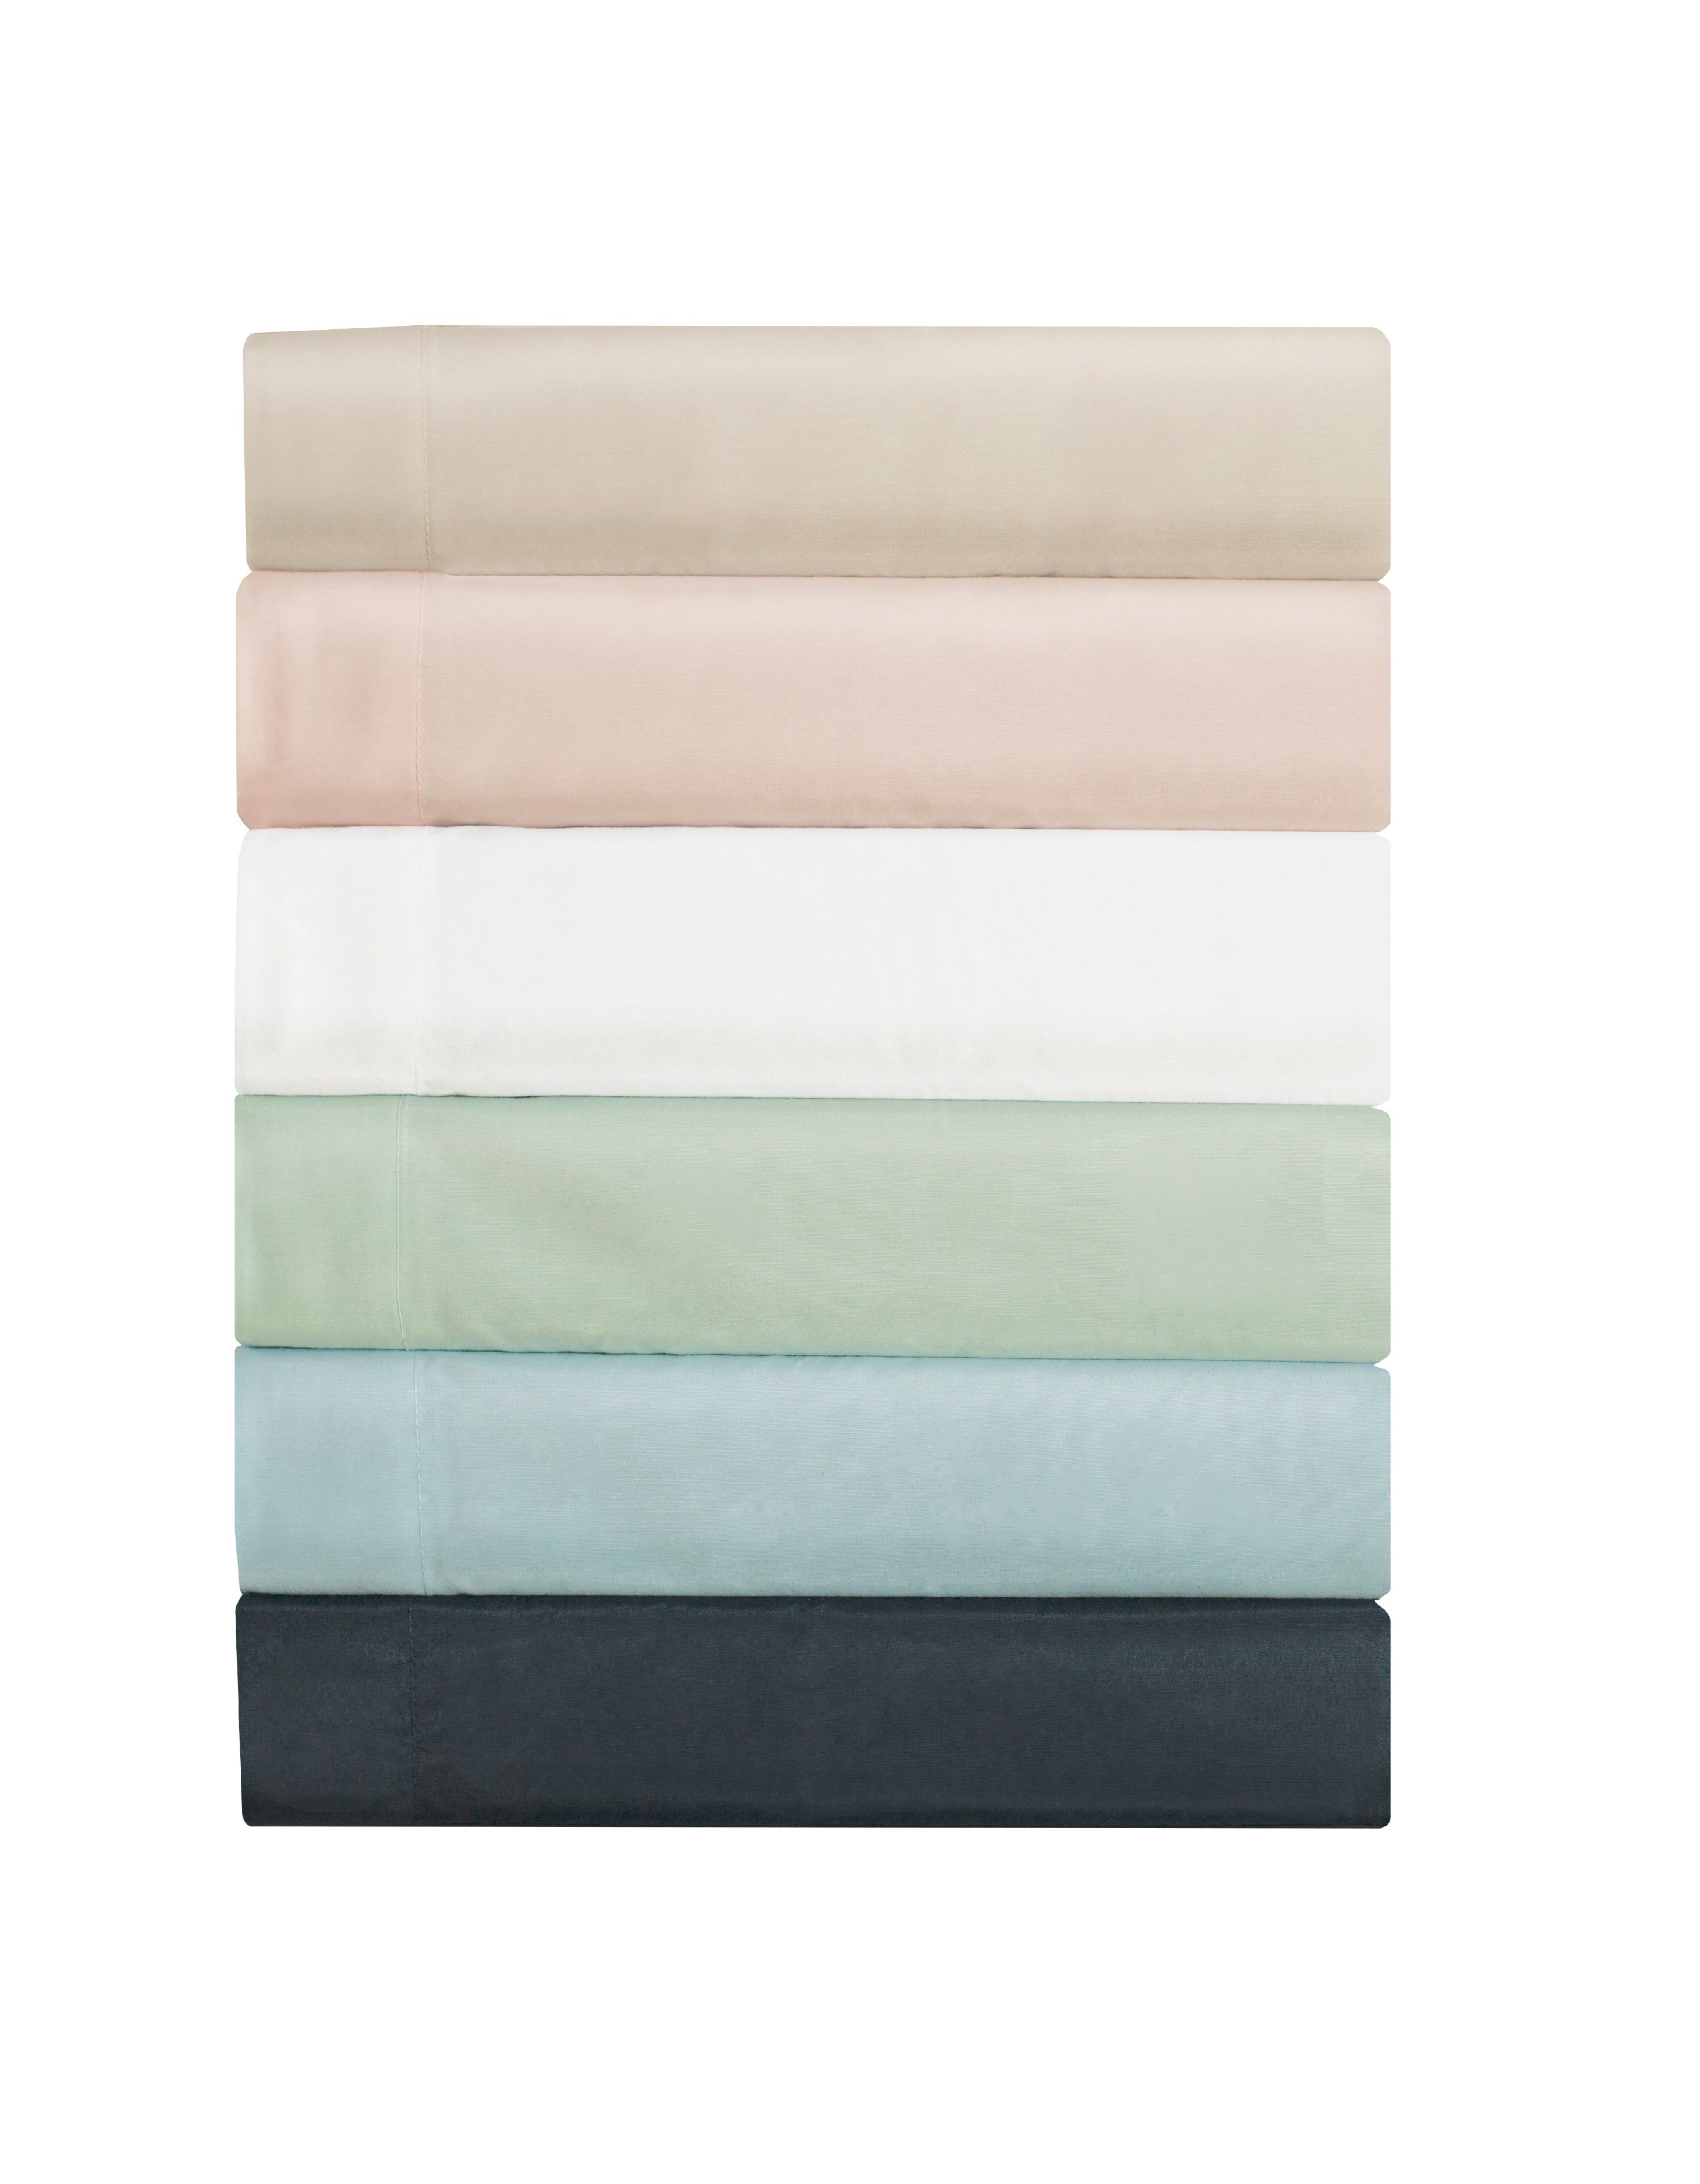 Royale Home Easy Care Sheet Set, Sage, Twin, Cotton Blend - image 2 of 2